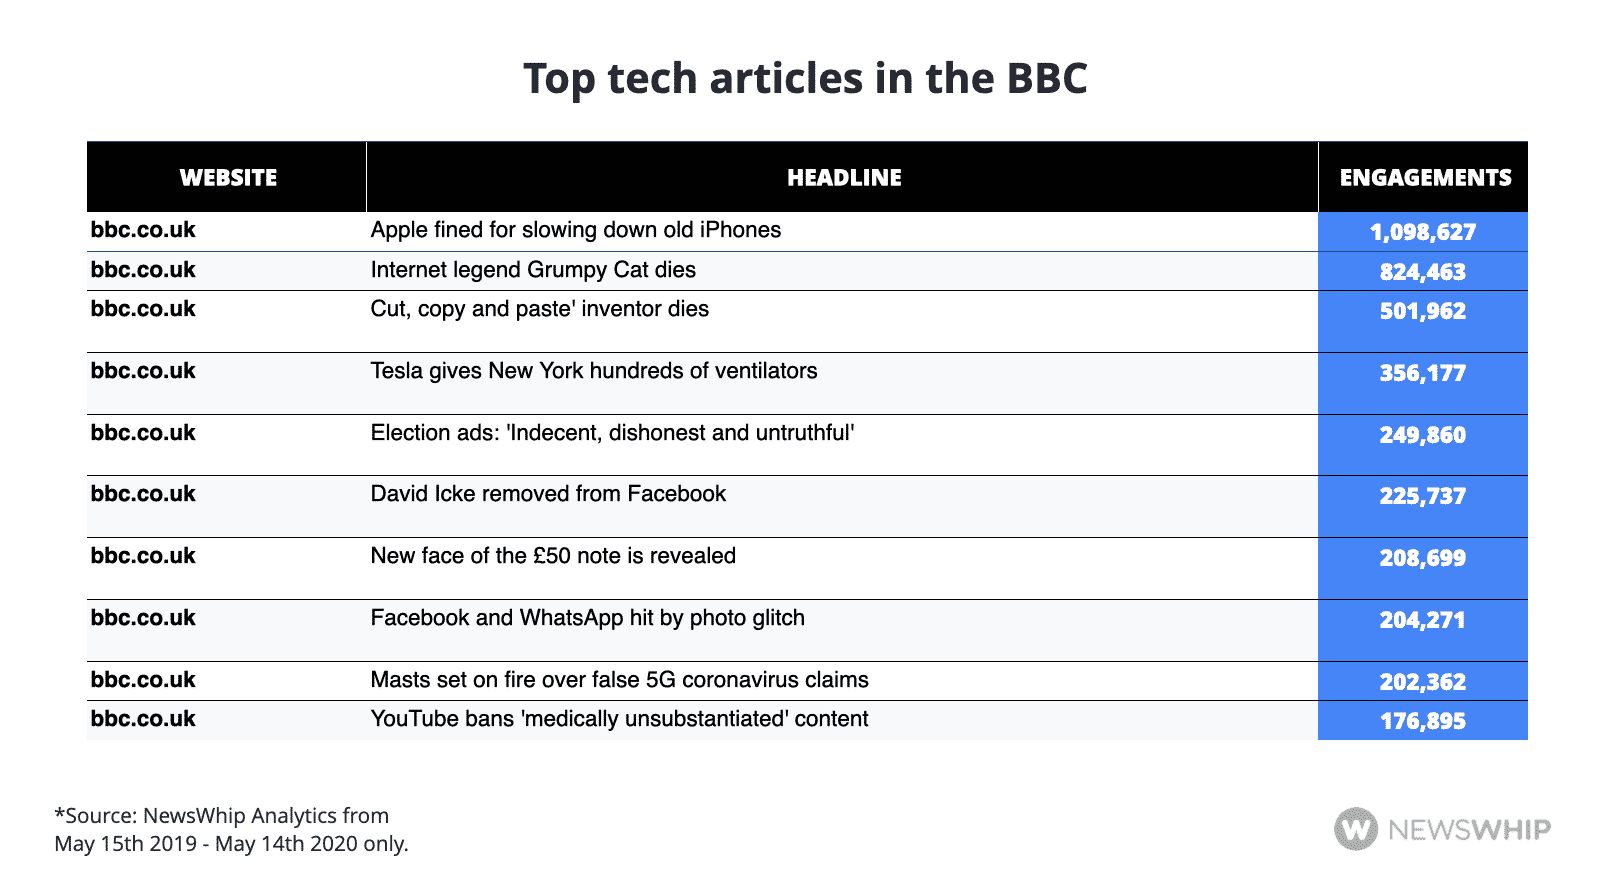 Chart showing the top tech articles of the last year in the BBC